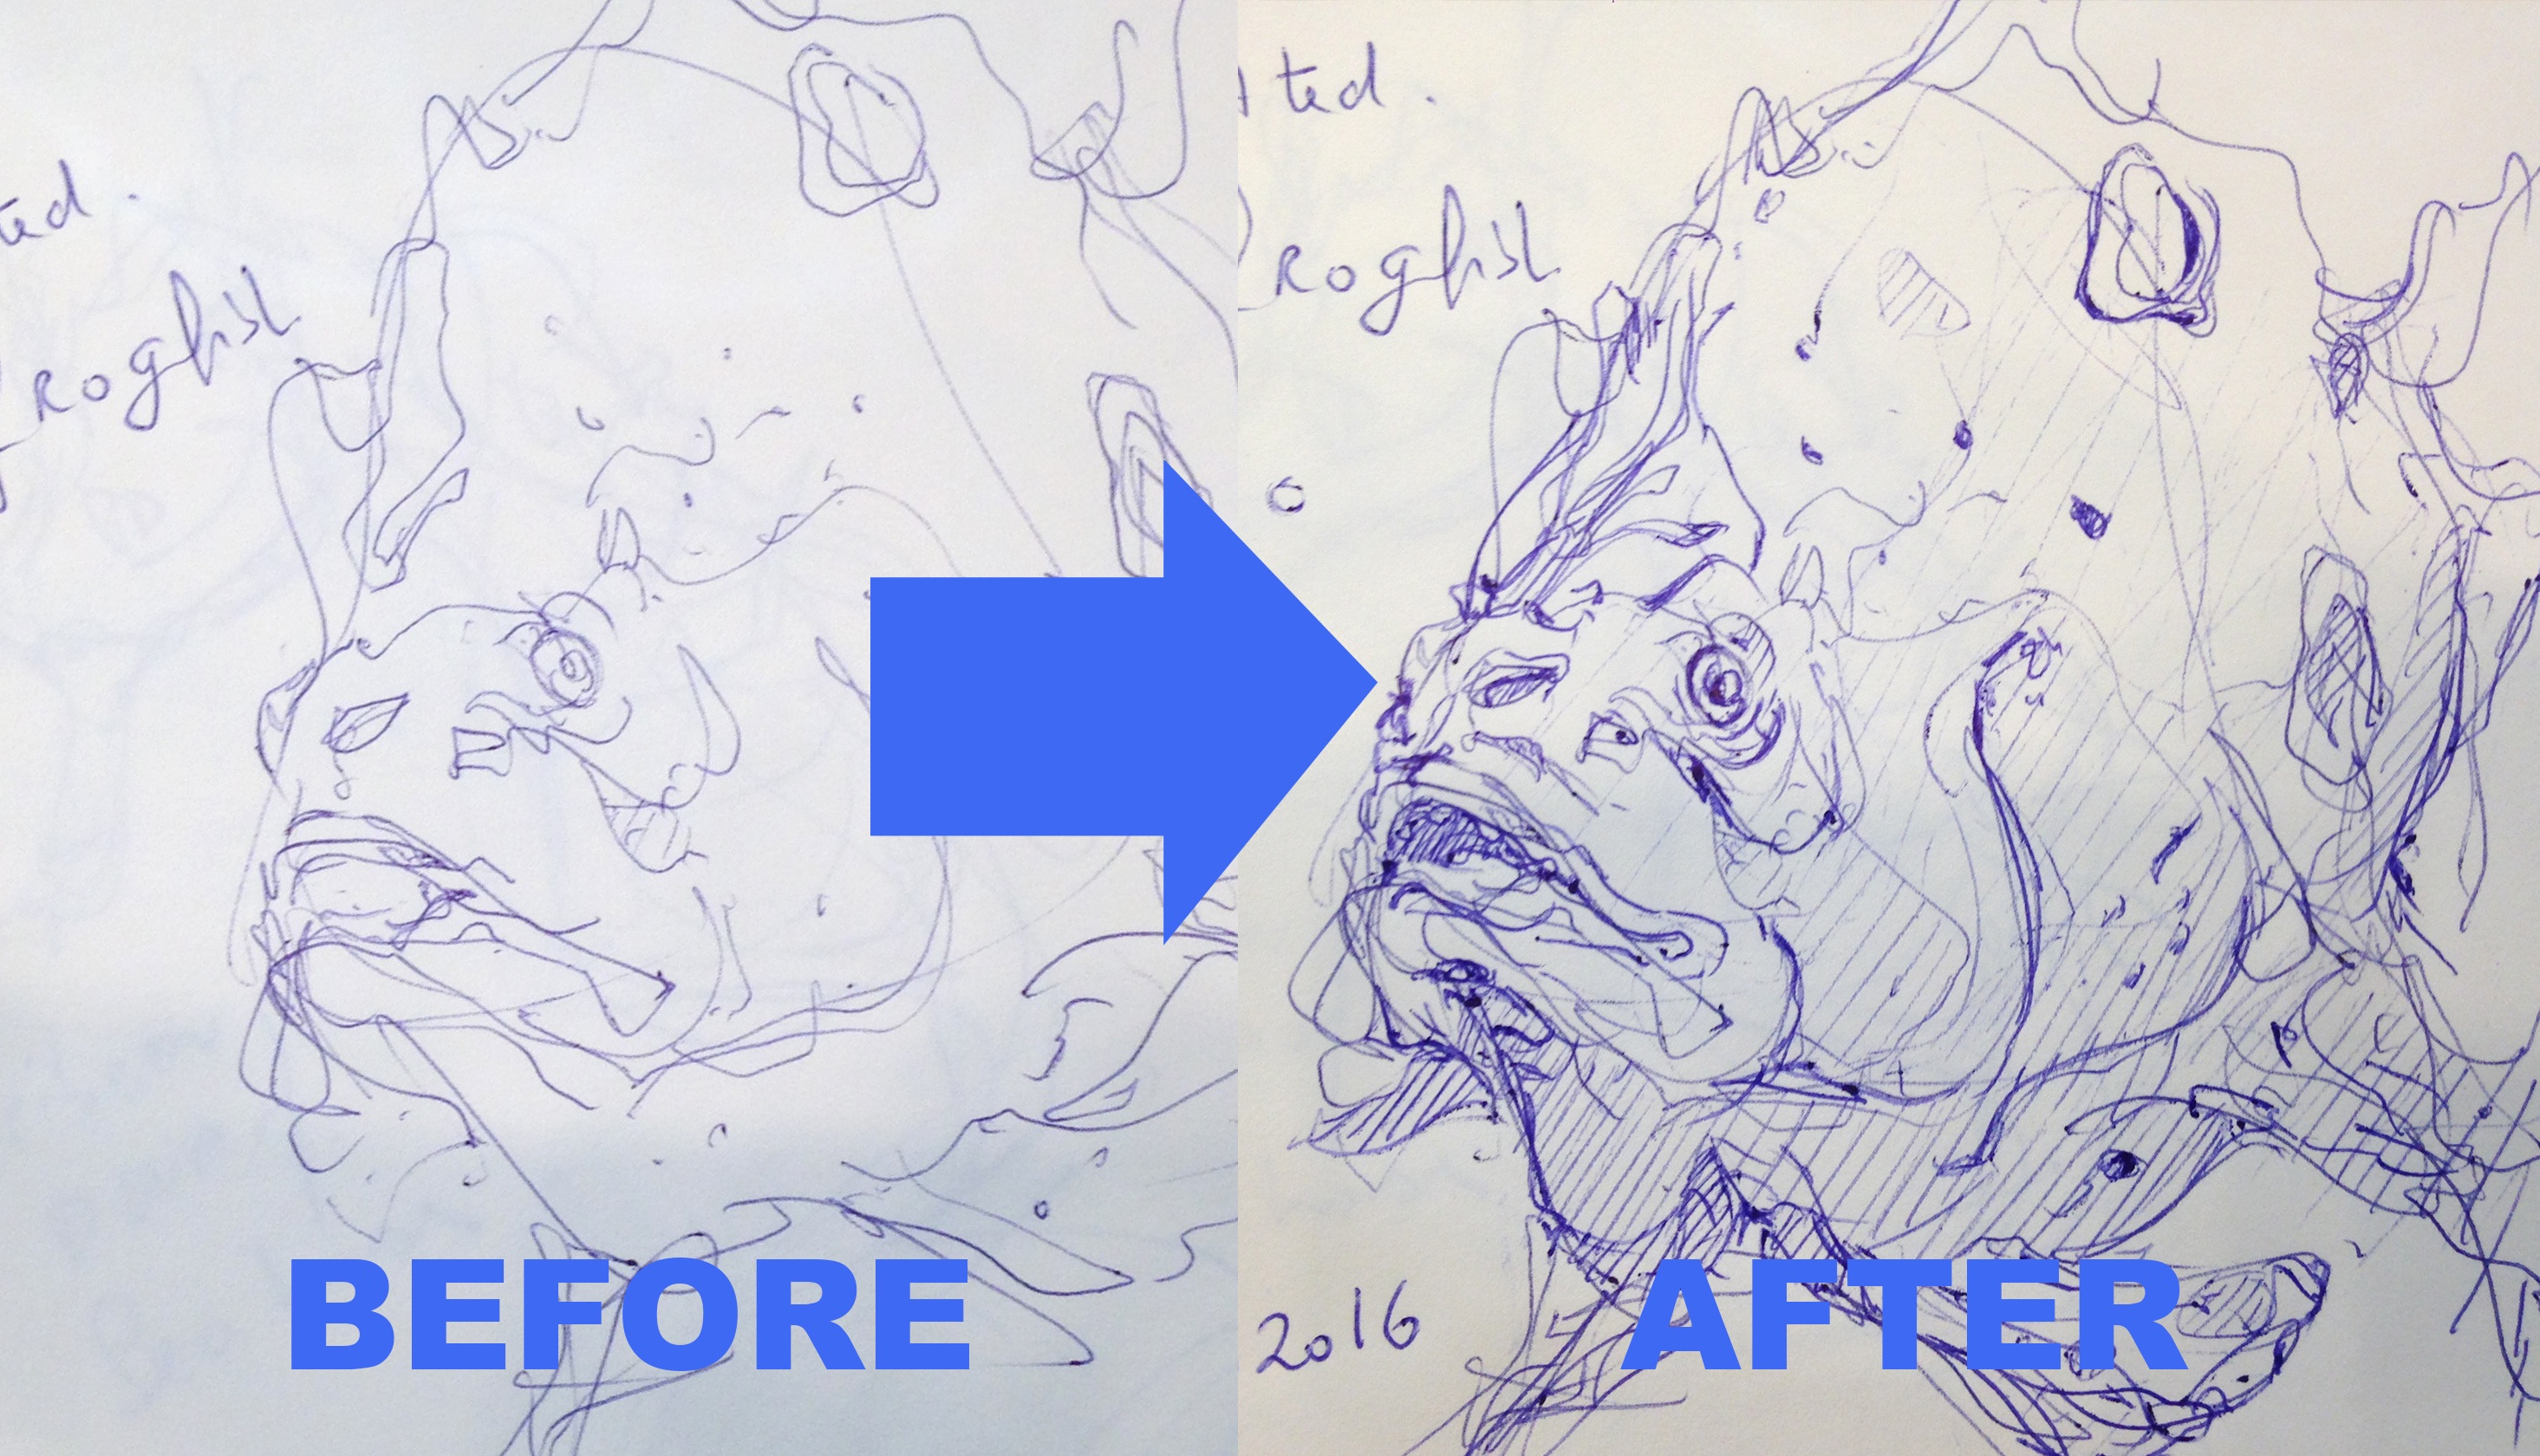 Before after the design sketchbook sketch boston acquarium fish drawing ball point pen blue bic copy